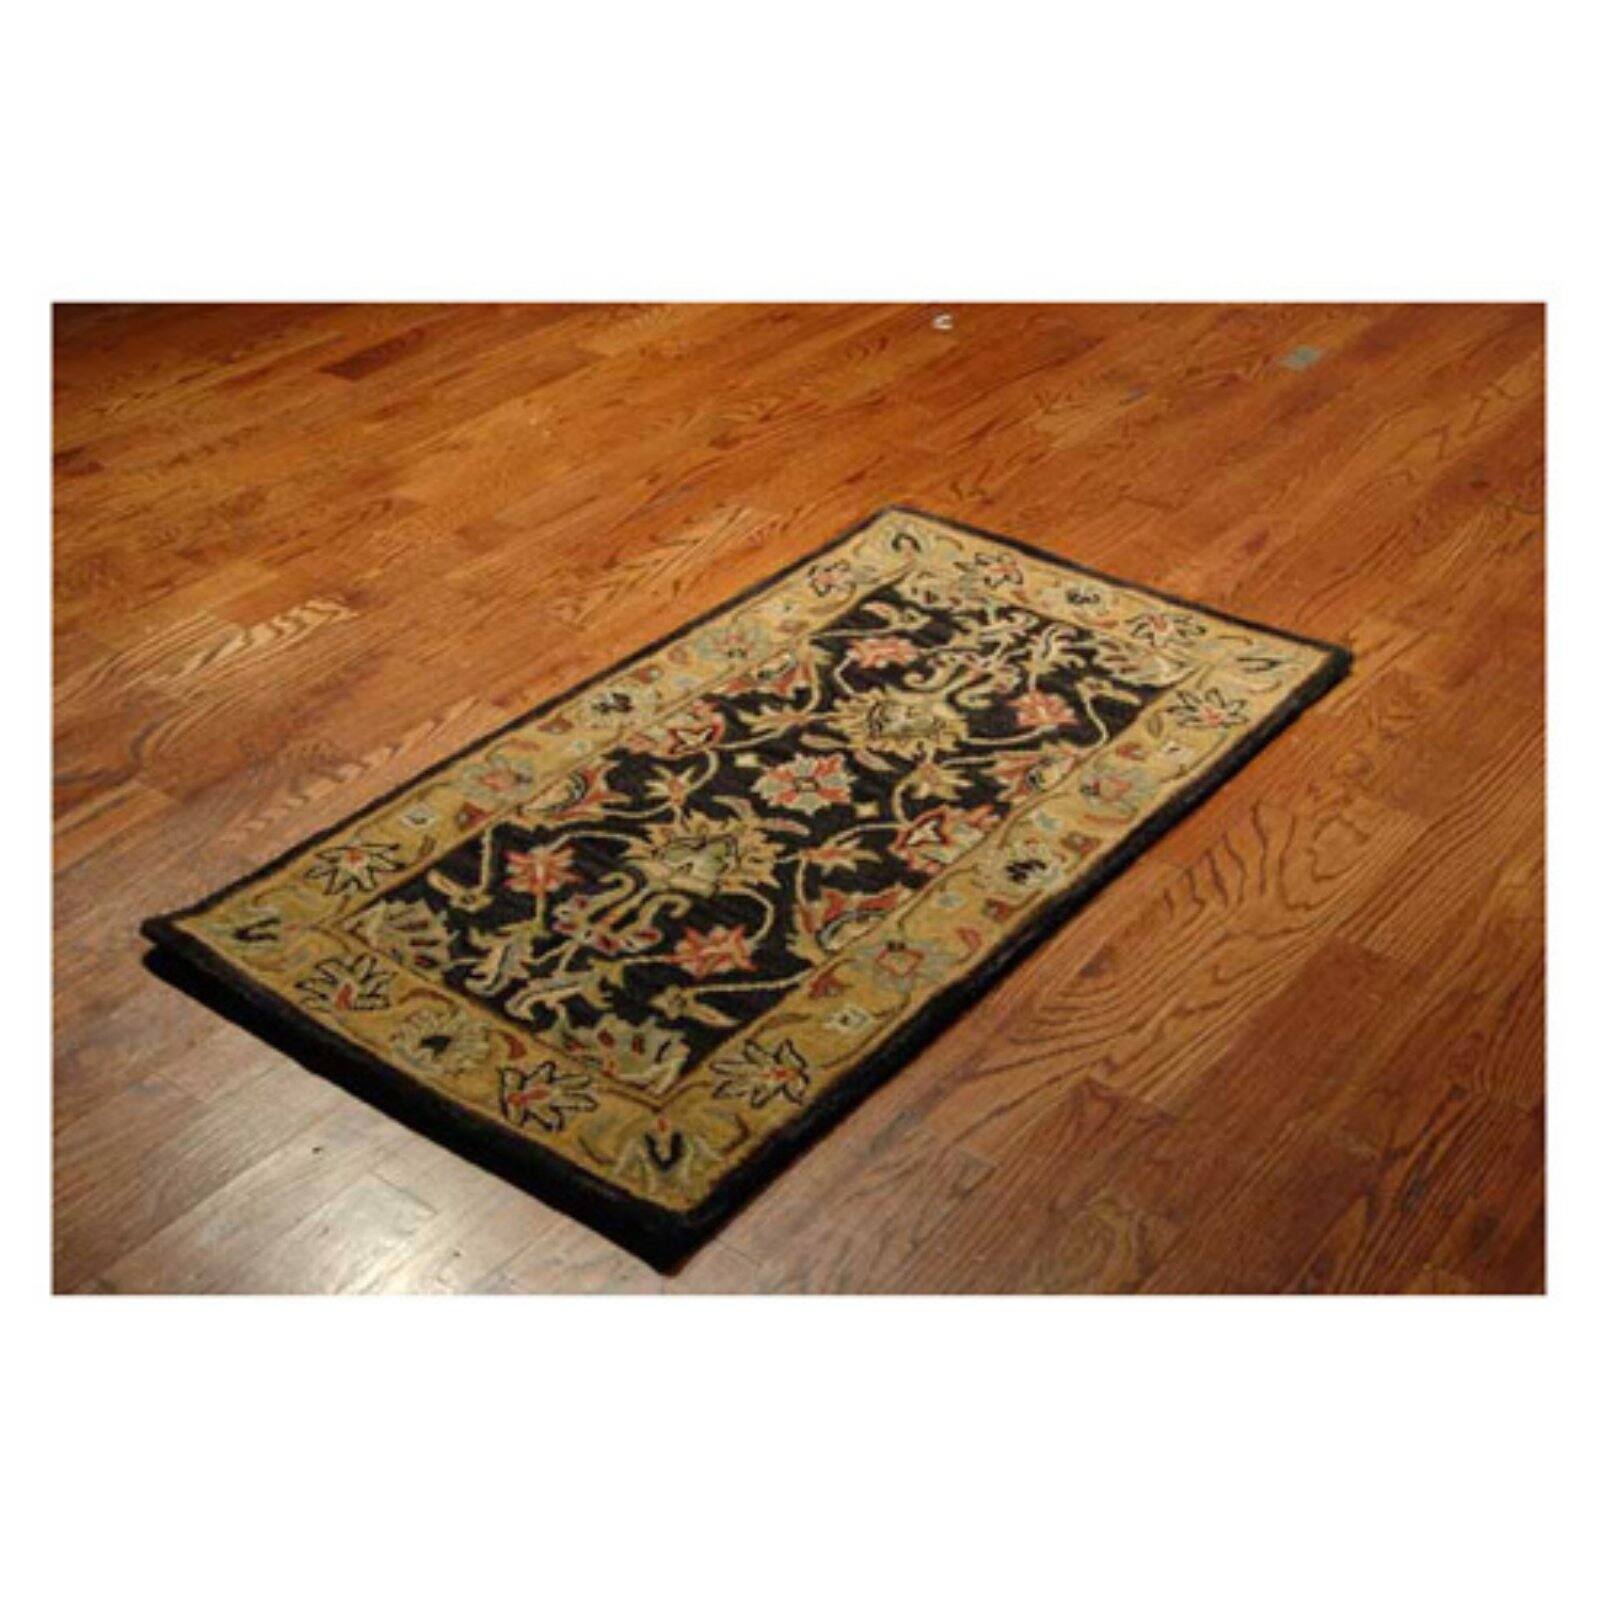 SAFAVIEH Heritage Regis Traditional Wool Area Rug, Charcoal/Gold, 3'6" x 3'6" Round - image 2 of 10